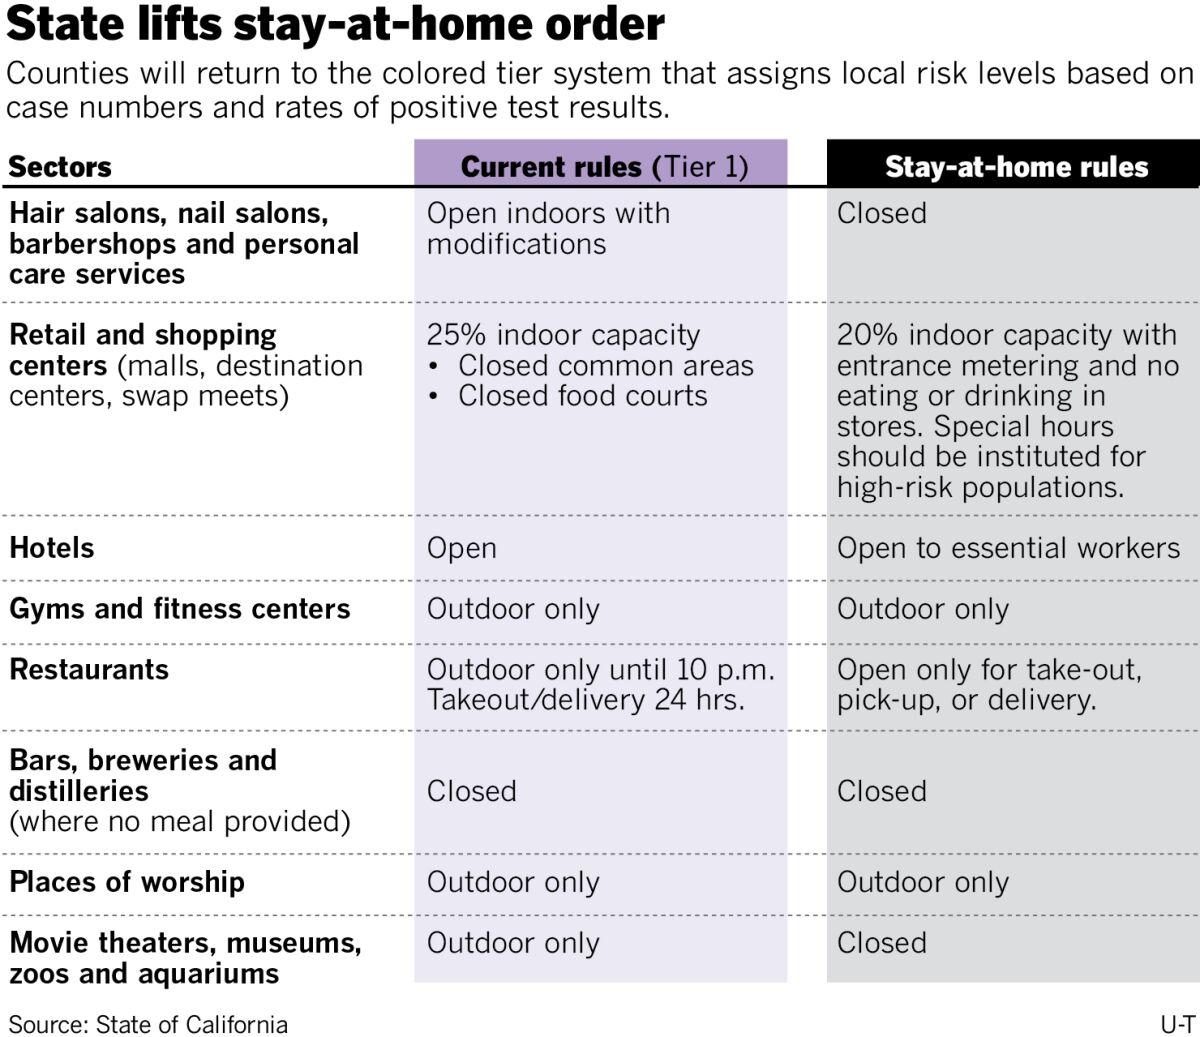 State lifts stay-at-home order